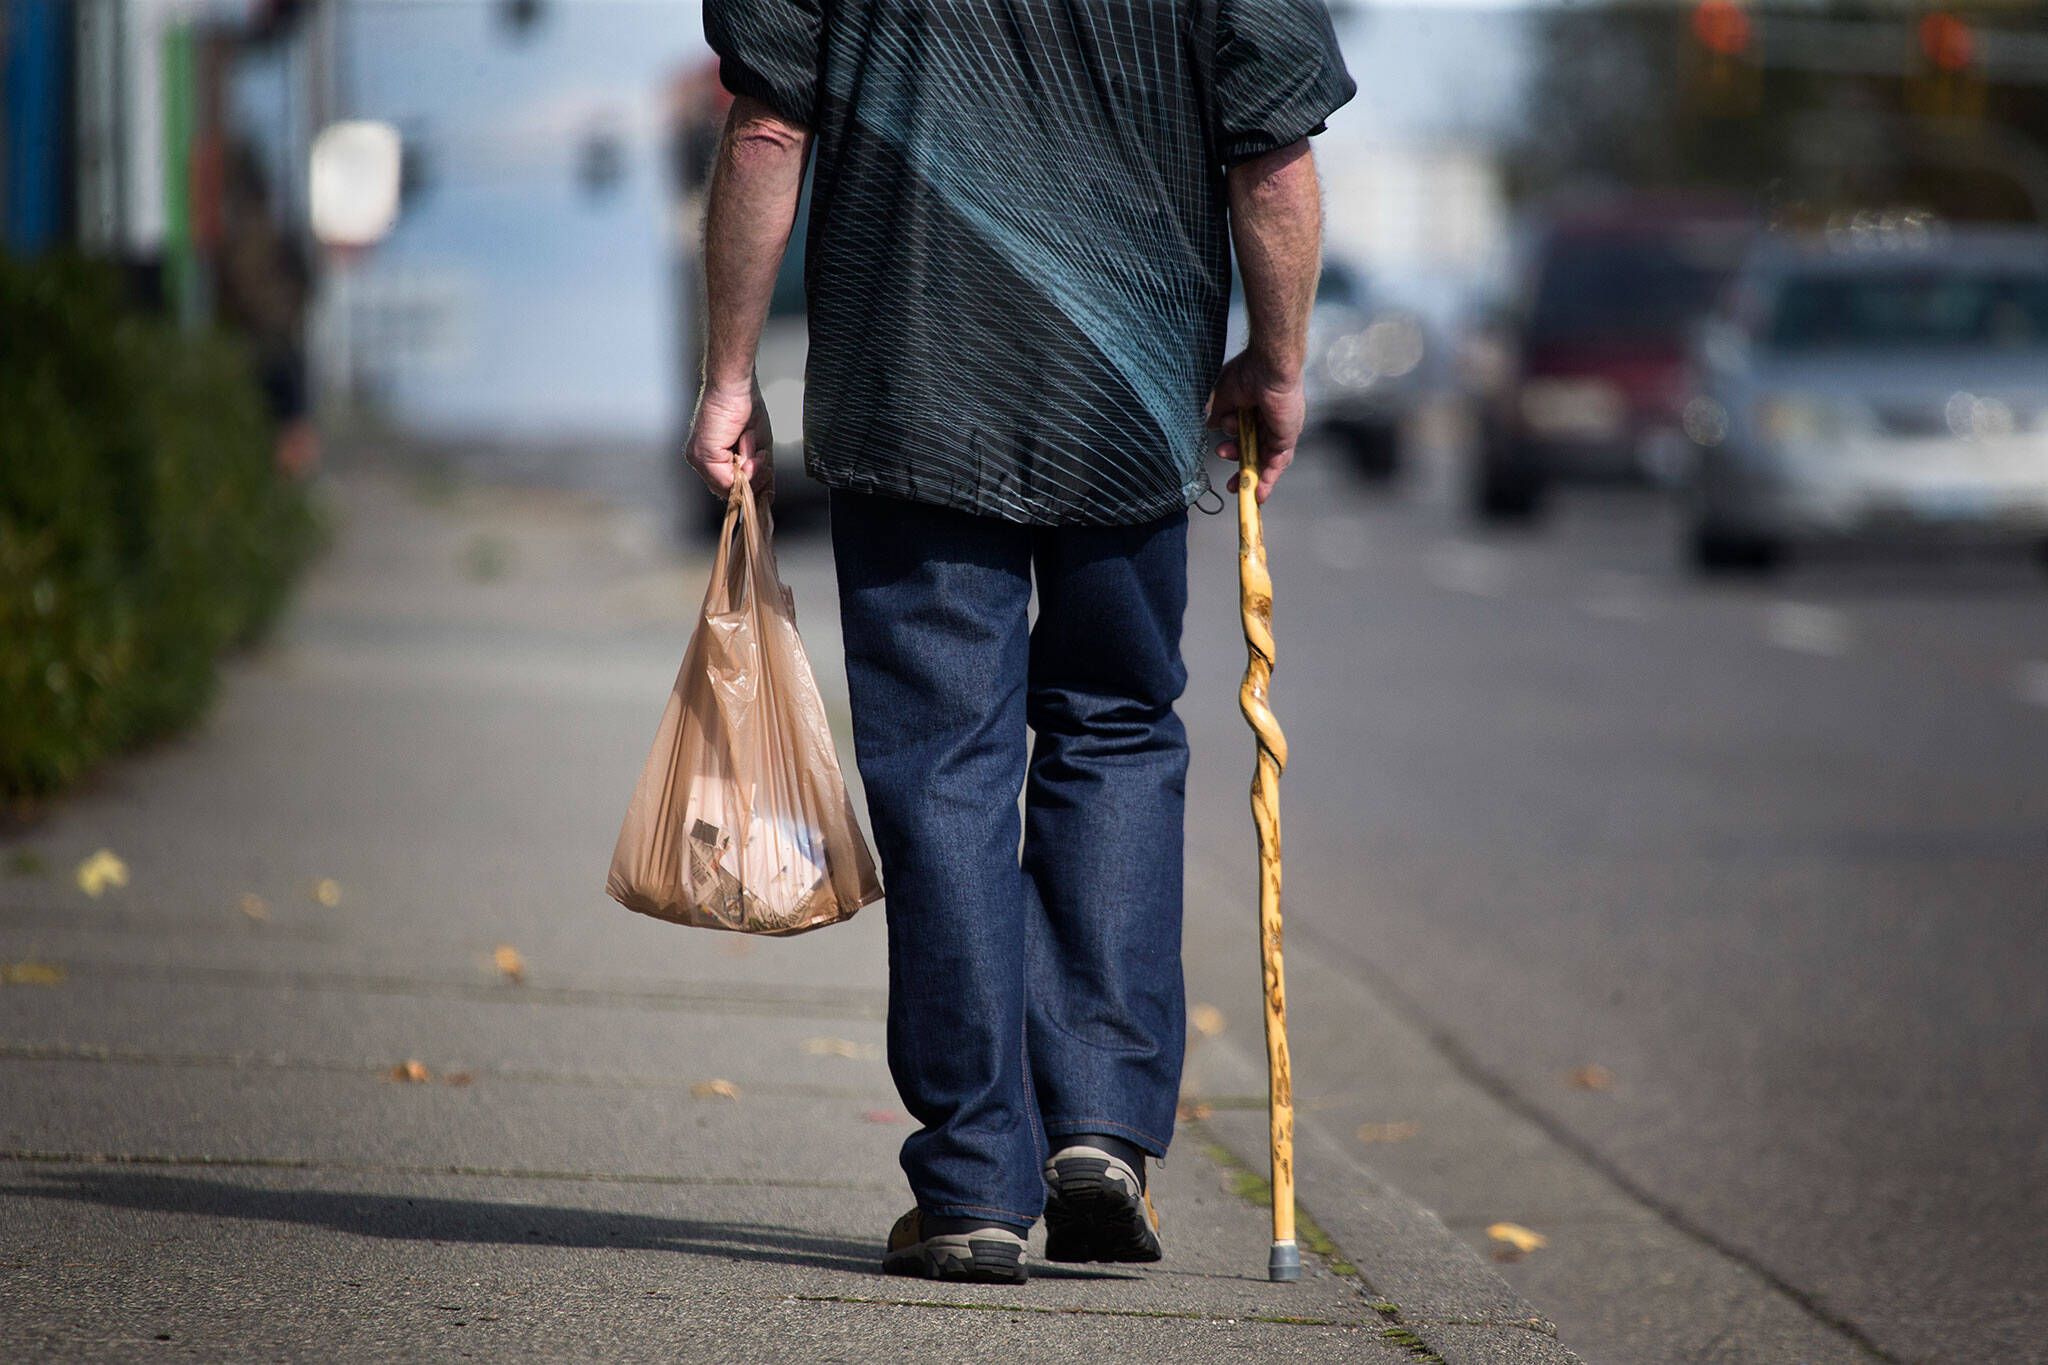 The City of Salmon Arm will be reintroducing its ban on single-use plastic shopping bags on July 1, 2022. (Andy Bronson/The Herald)